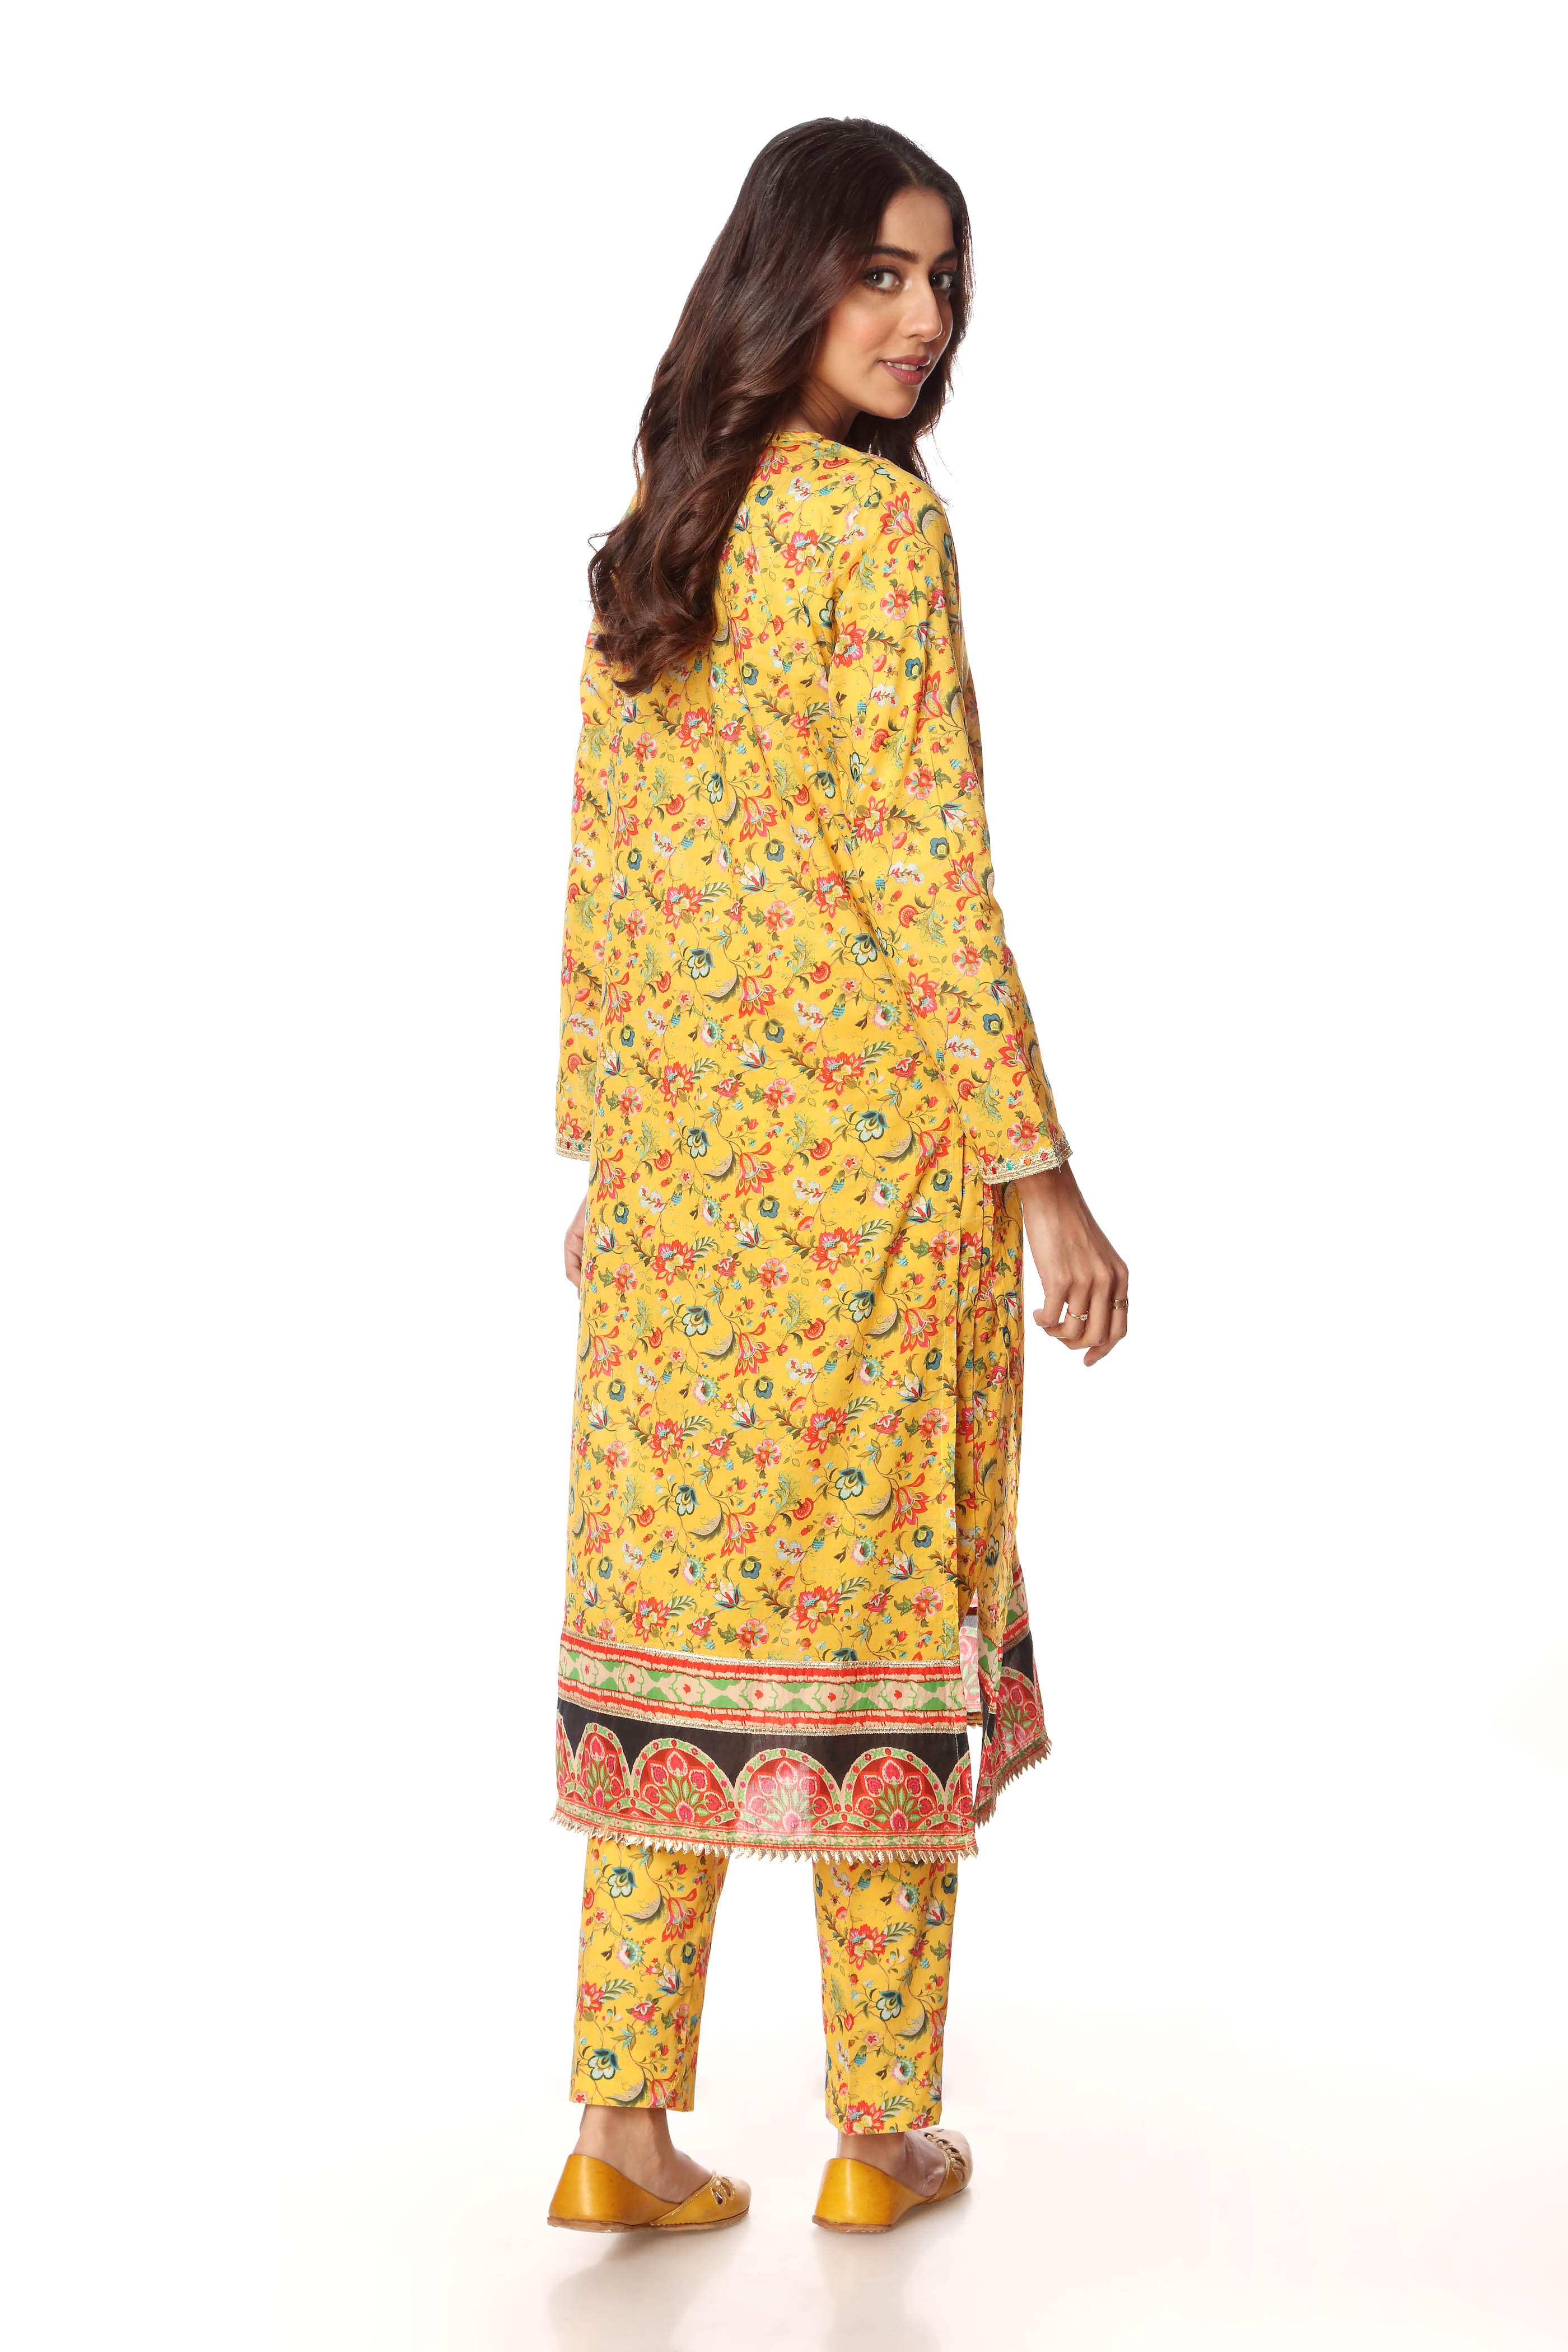 Mustard Wave Ll in Multi coloured Printed Lawn fabric 3